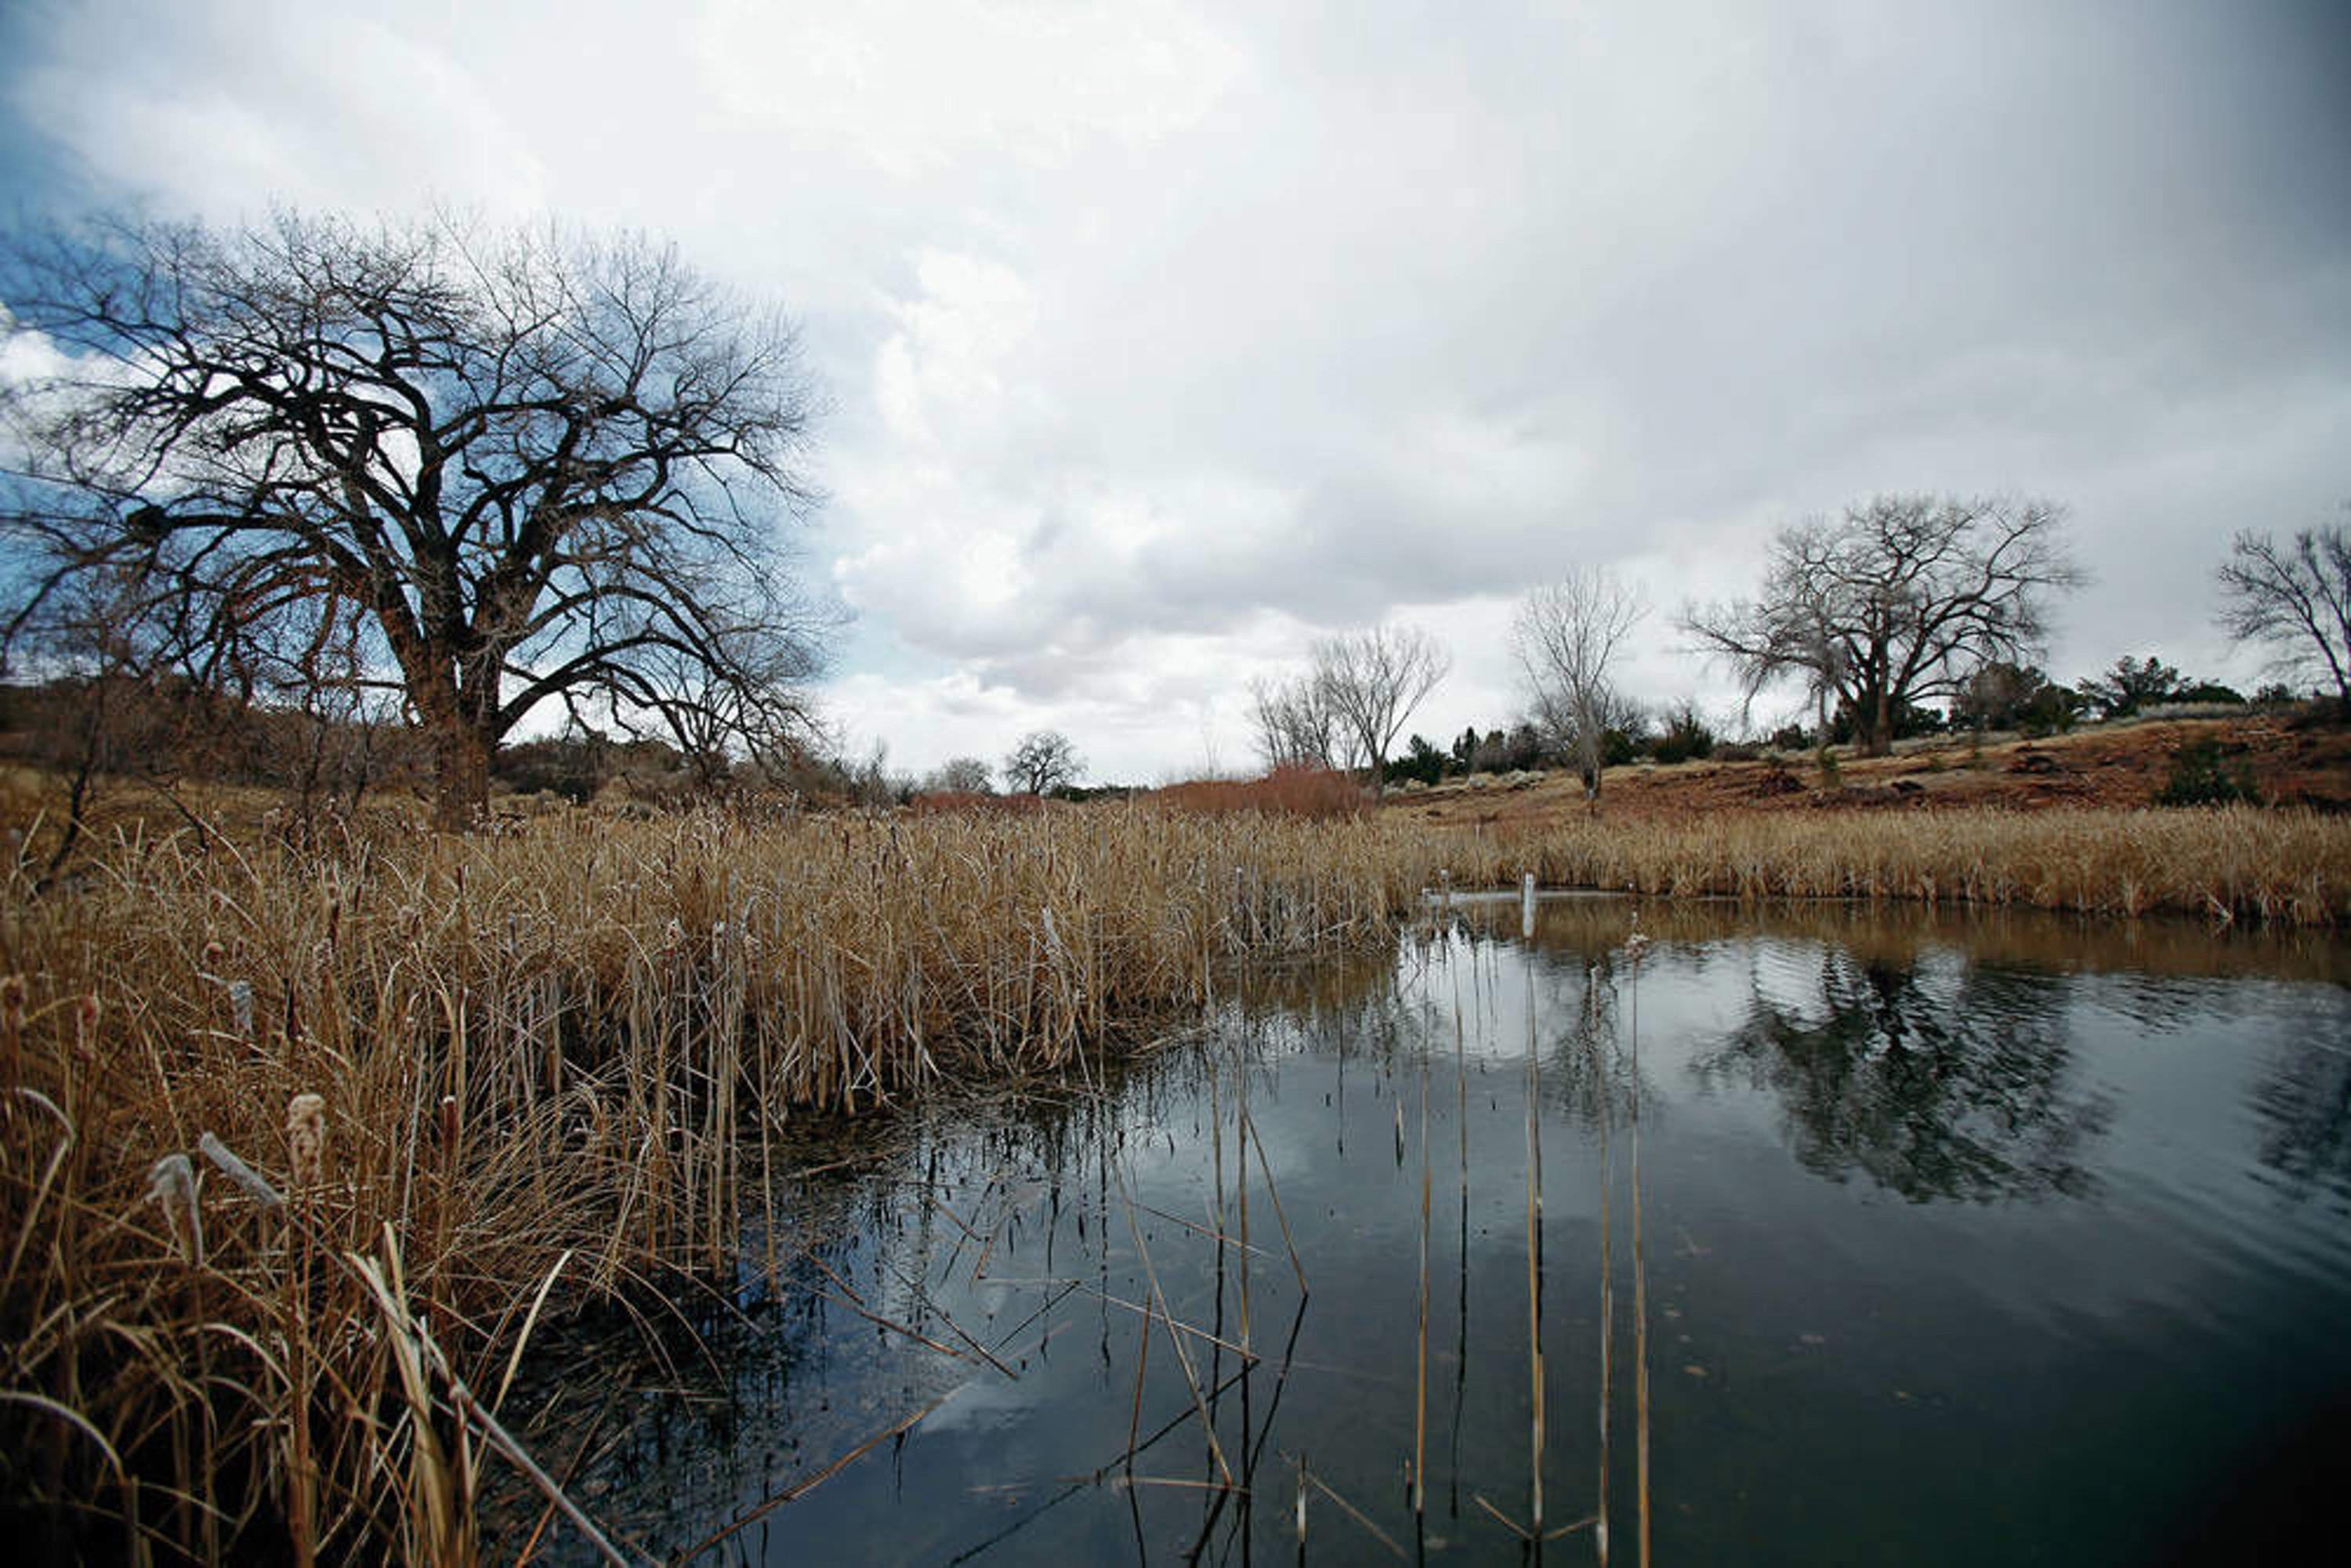 Russian Invaders Tree Threatening New Mexico Wetlands